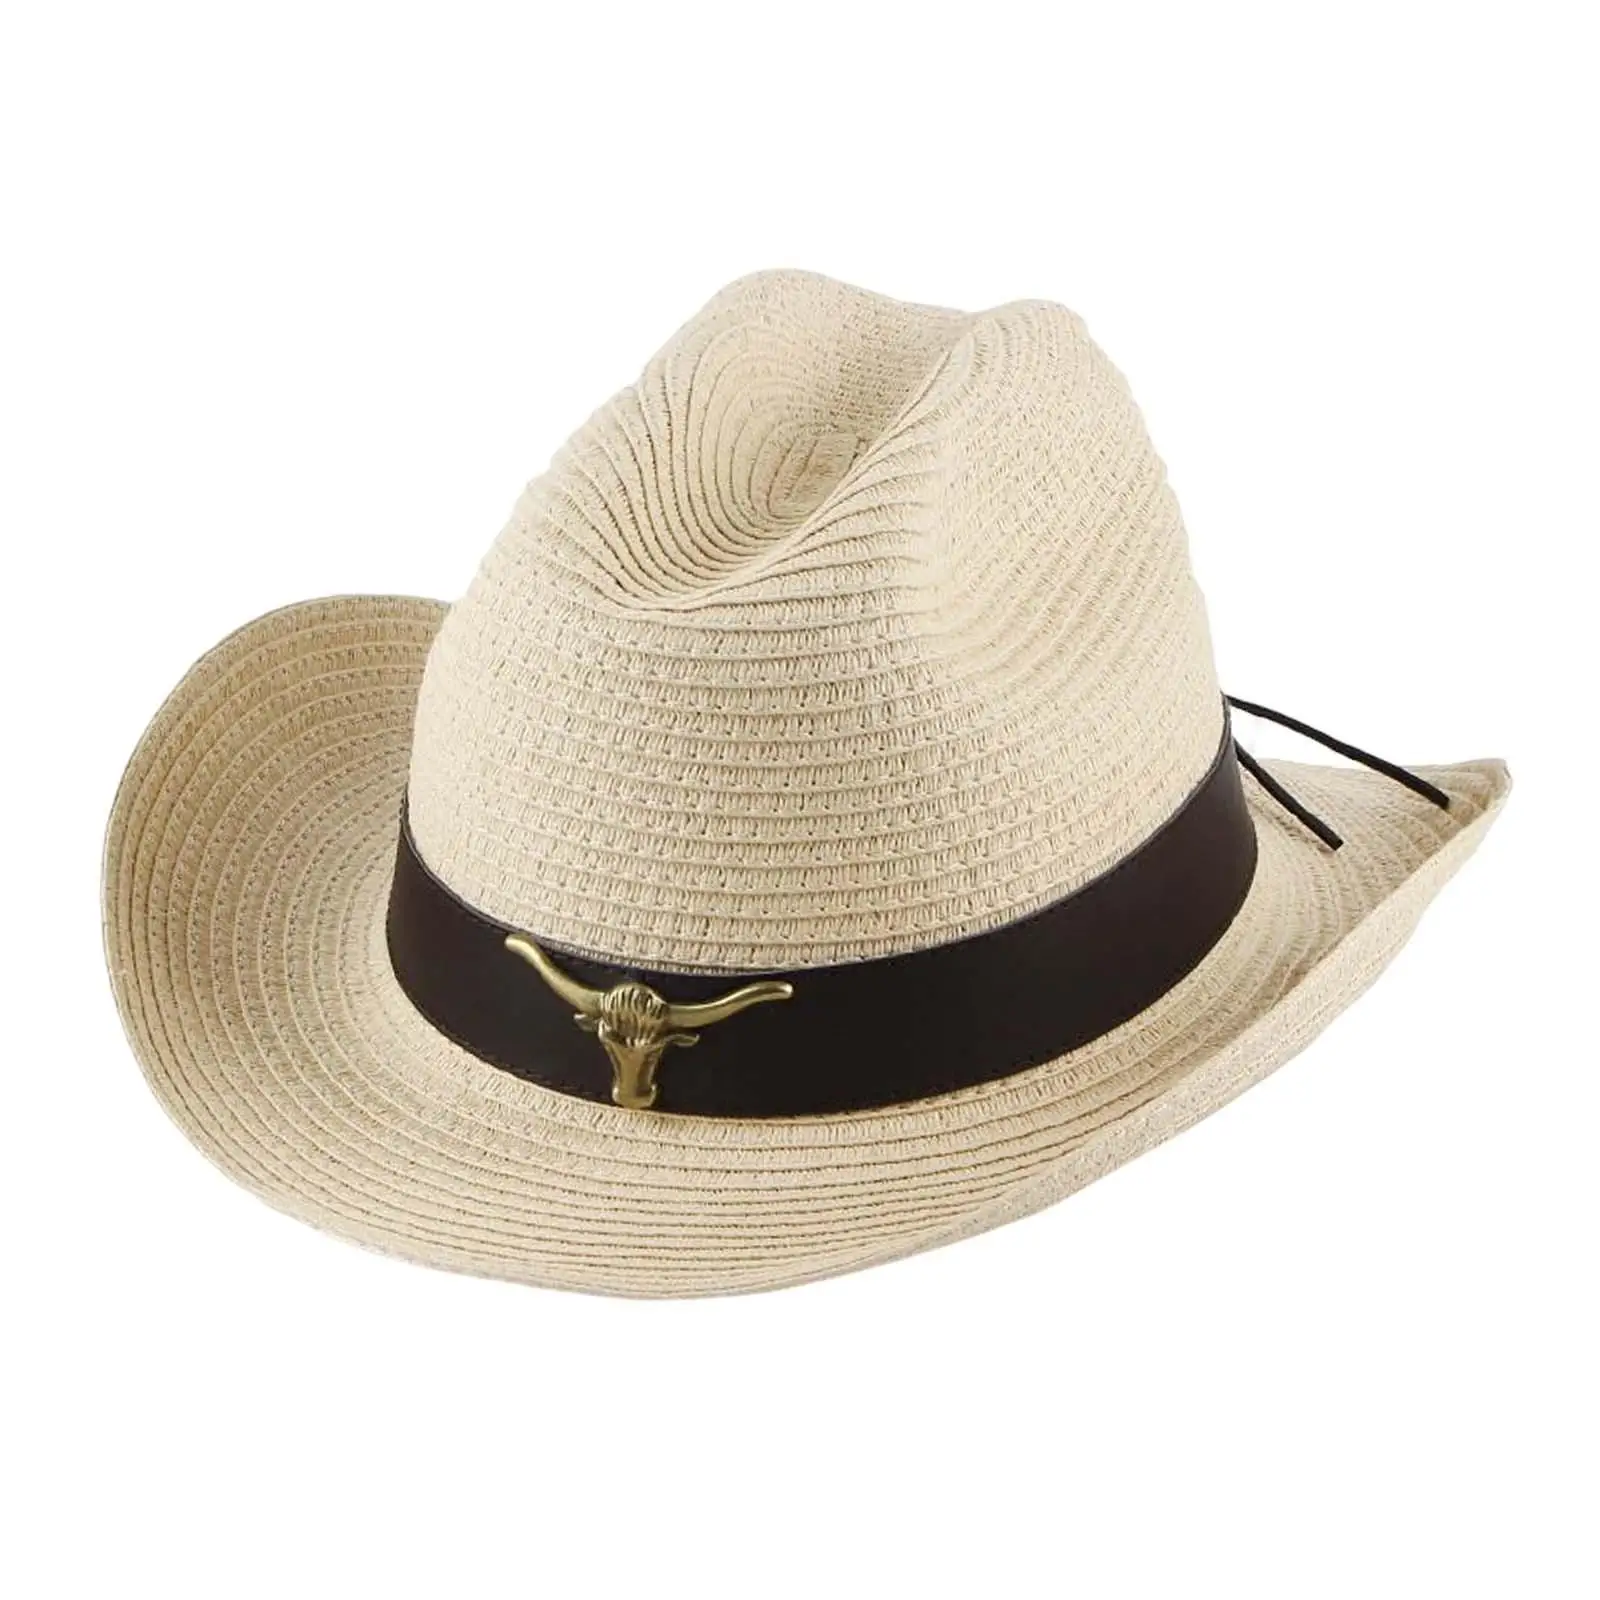 Fashionable Western Cowboy Hat Sun Protection Hat Wide Brim Straw Cow Decorate for Summer Outdoor Leisure Cowgirl Beach Adults